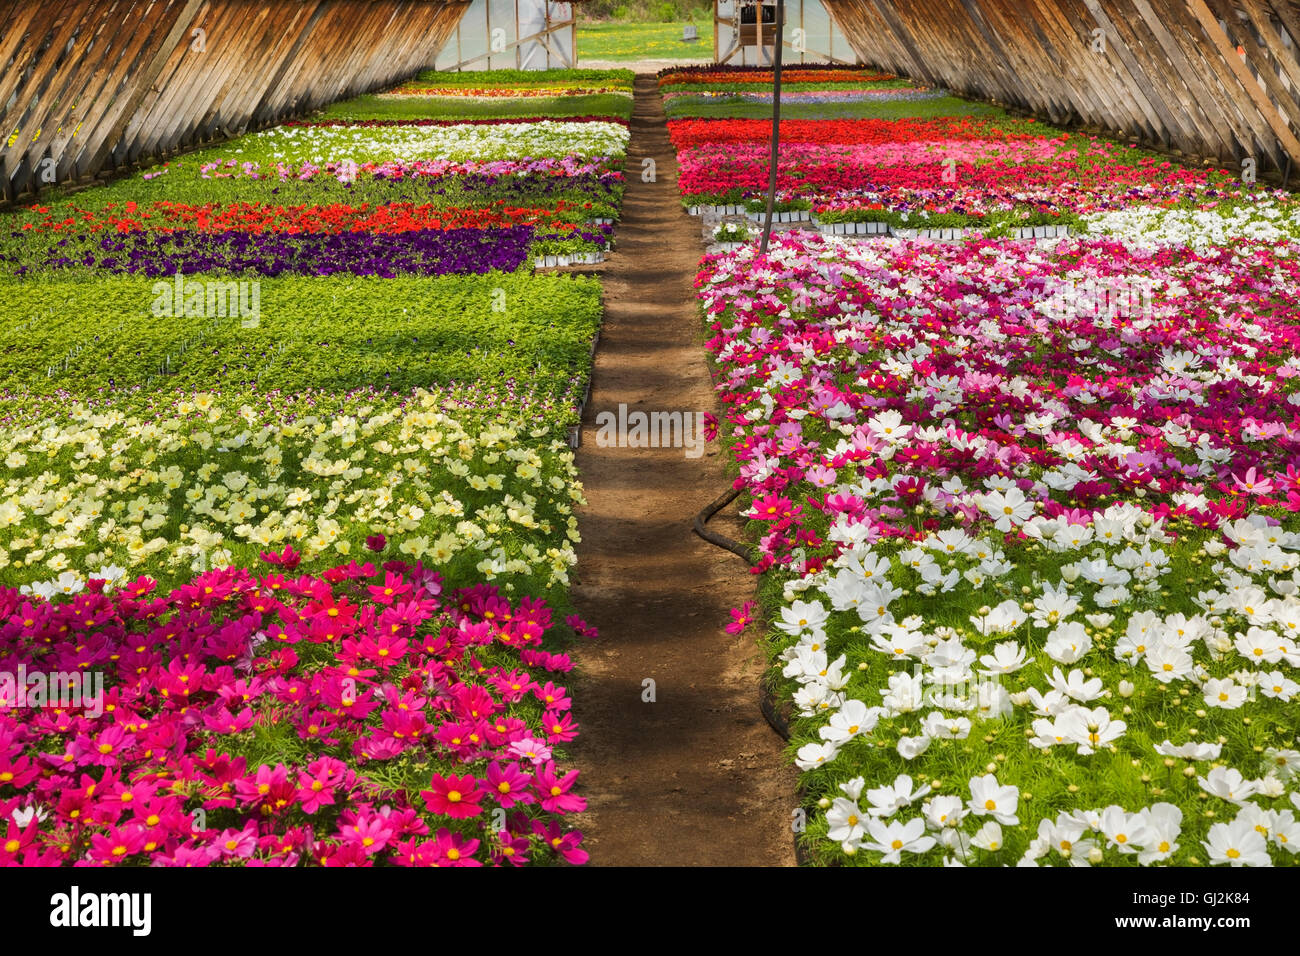 Commercial greenhouse with tightly packed mixed purple, white, pink and red Cosmos flowers in containers Stock Photo